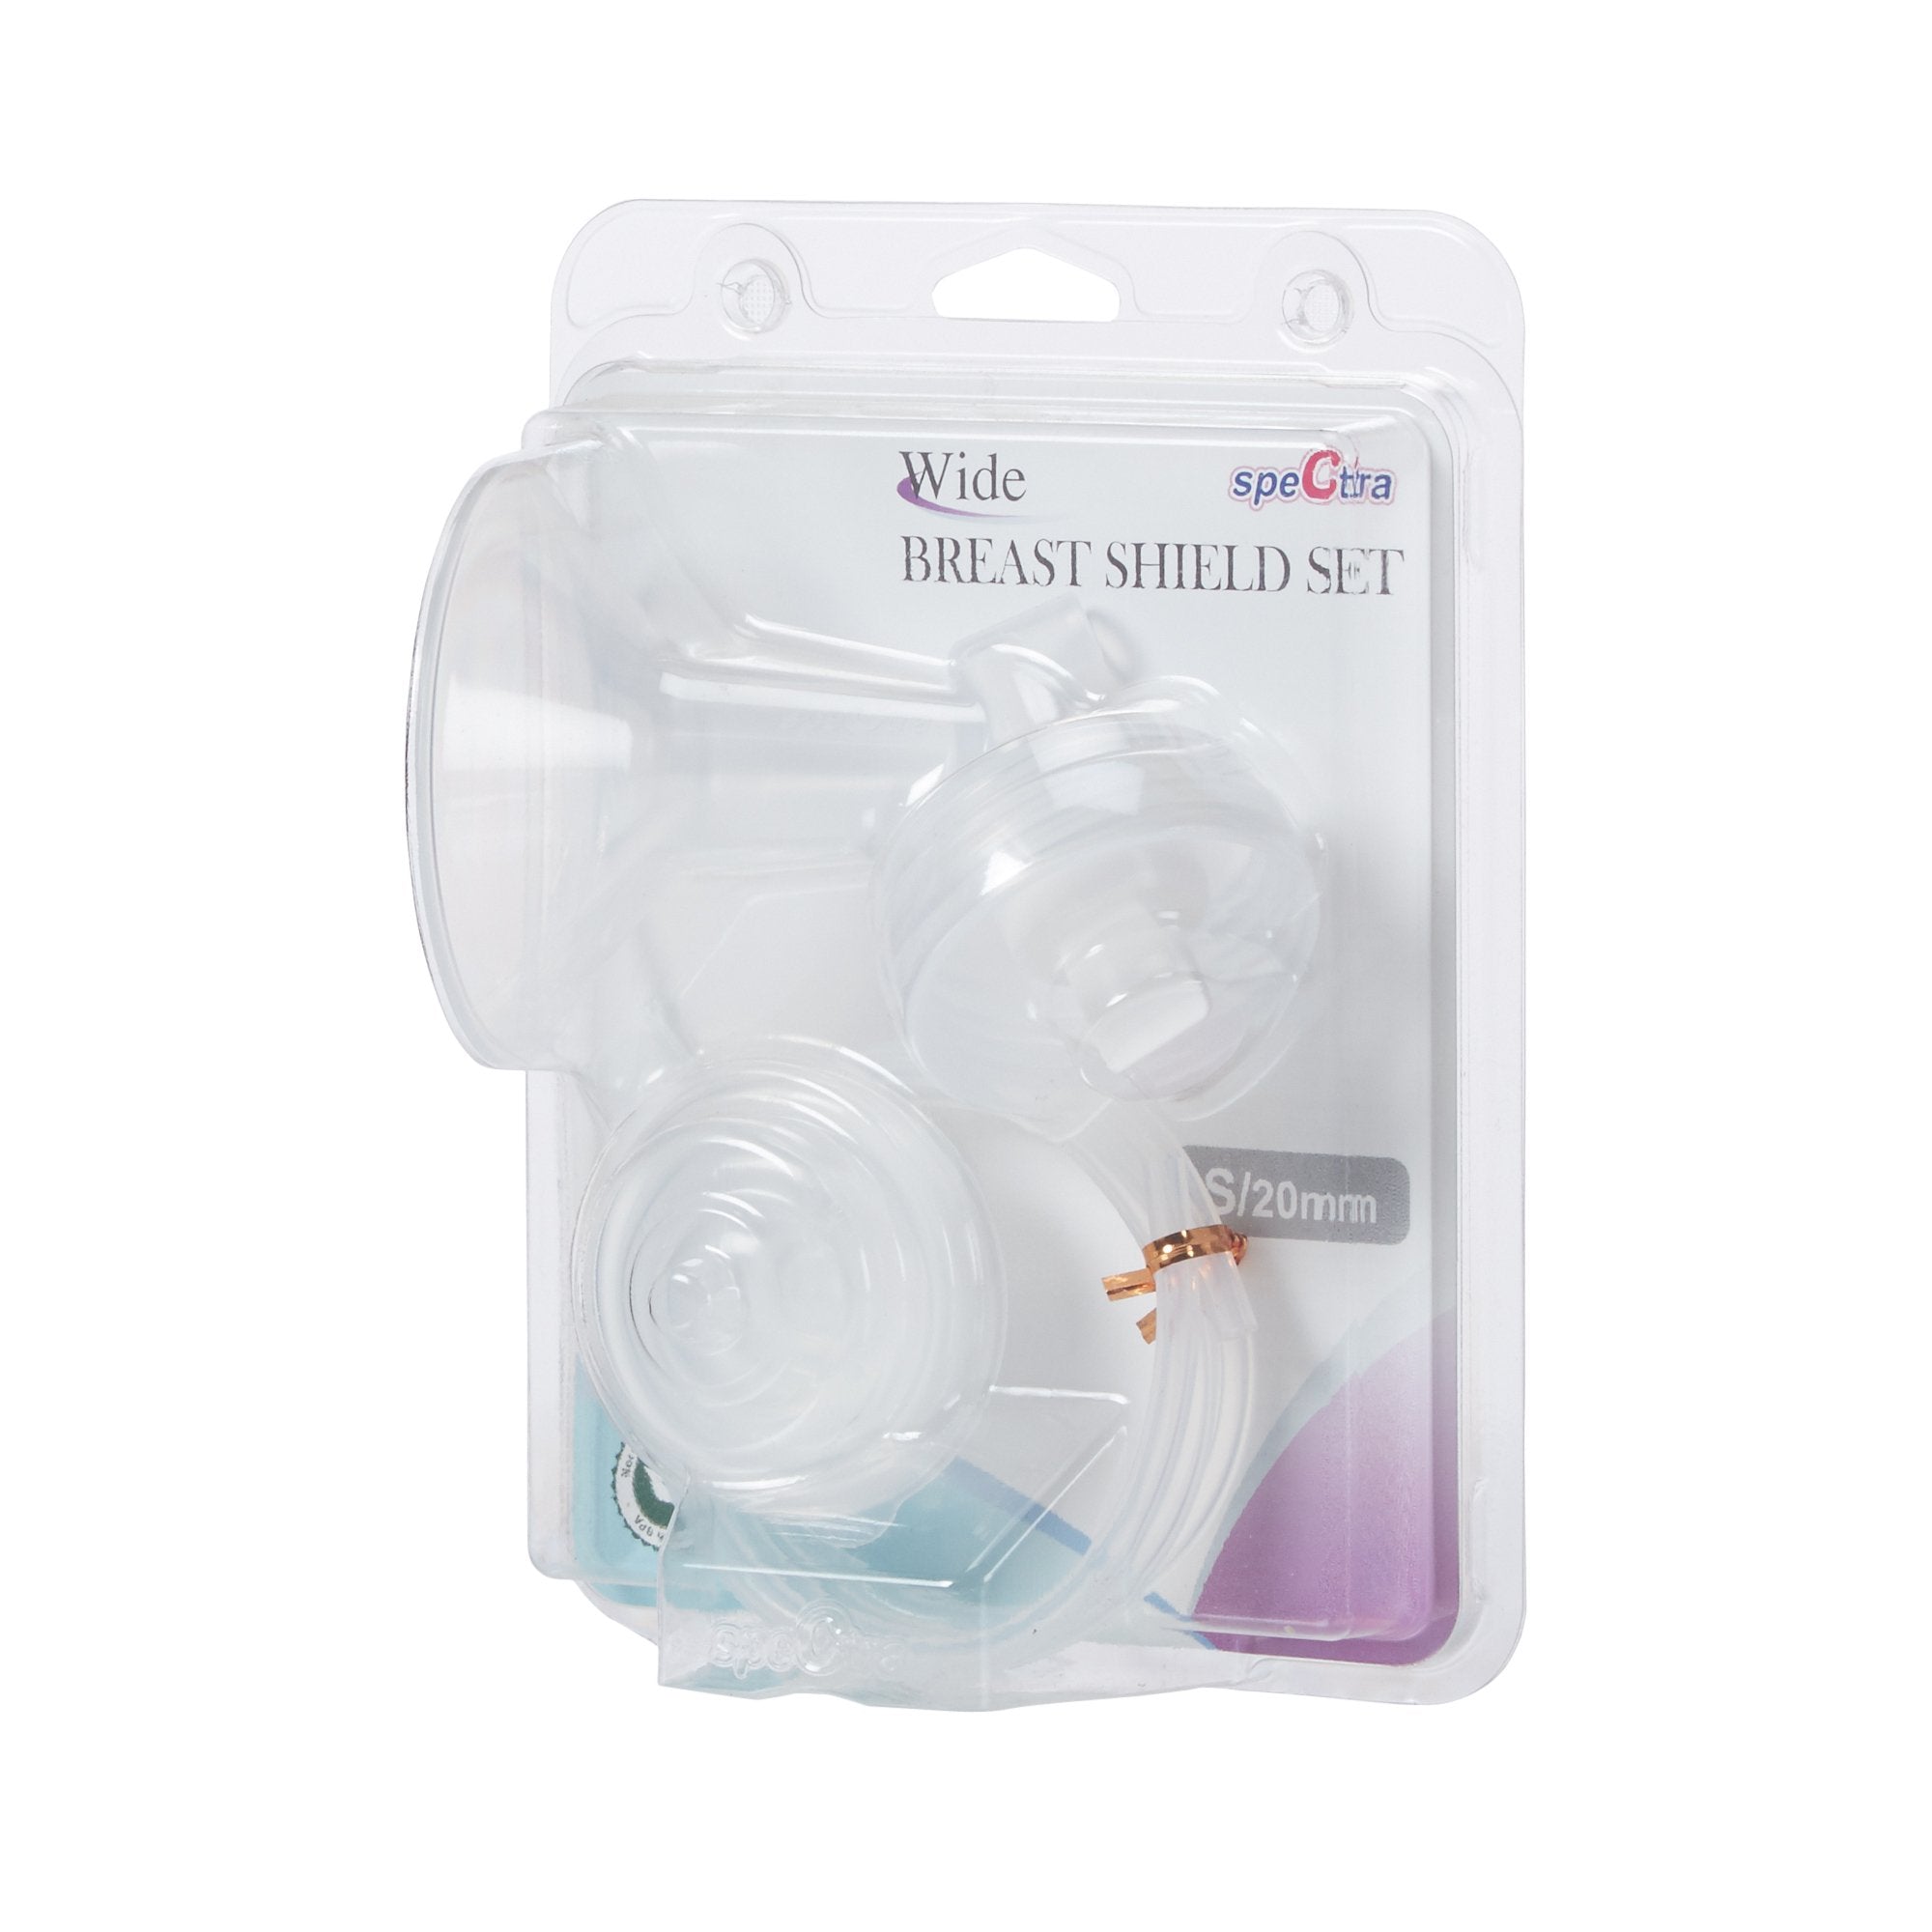 Breast Shield Replacement Set Spectra For Spectra S2, S1 or S9 Breast Pumps